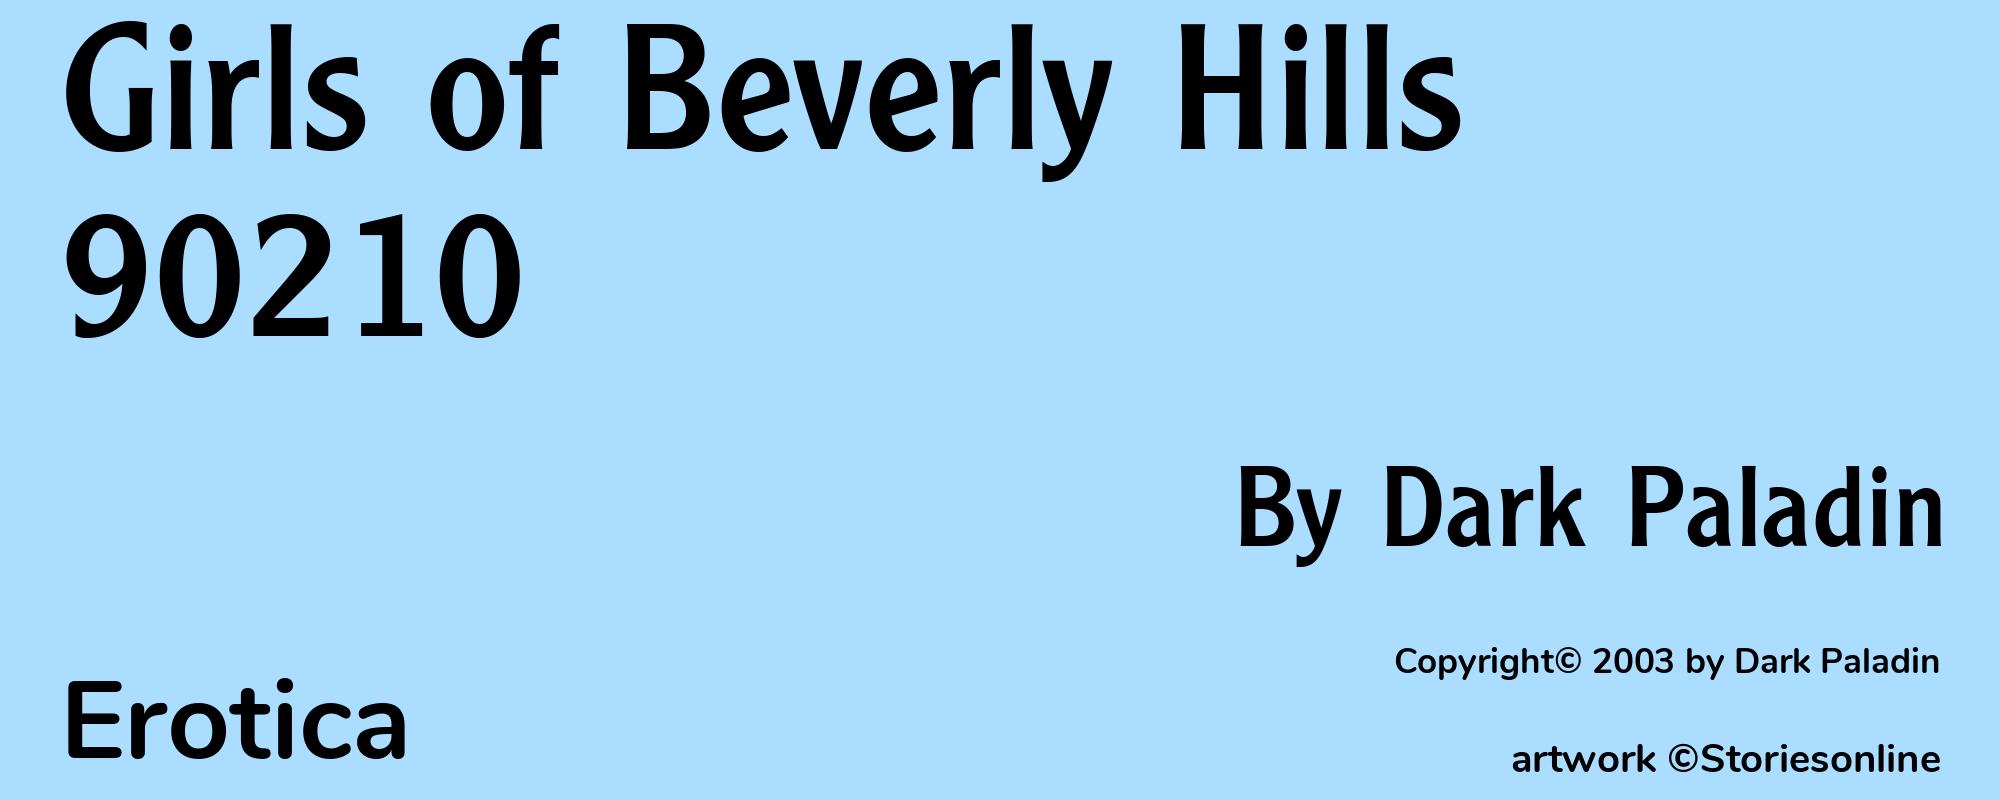 Girls of Beverly Hills 90210 - Cover